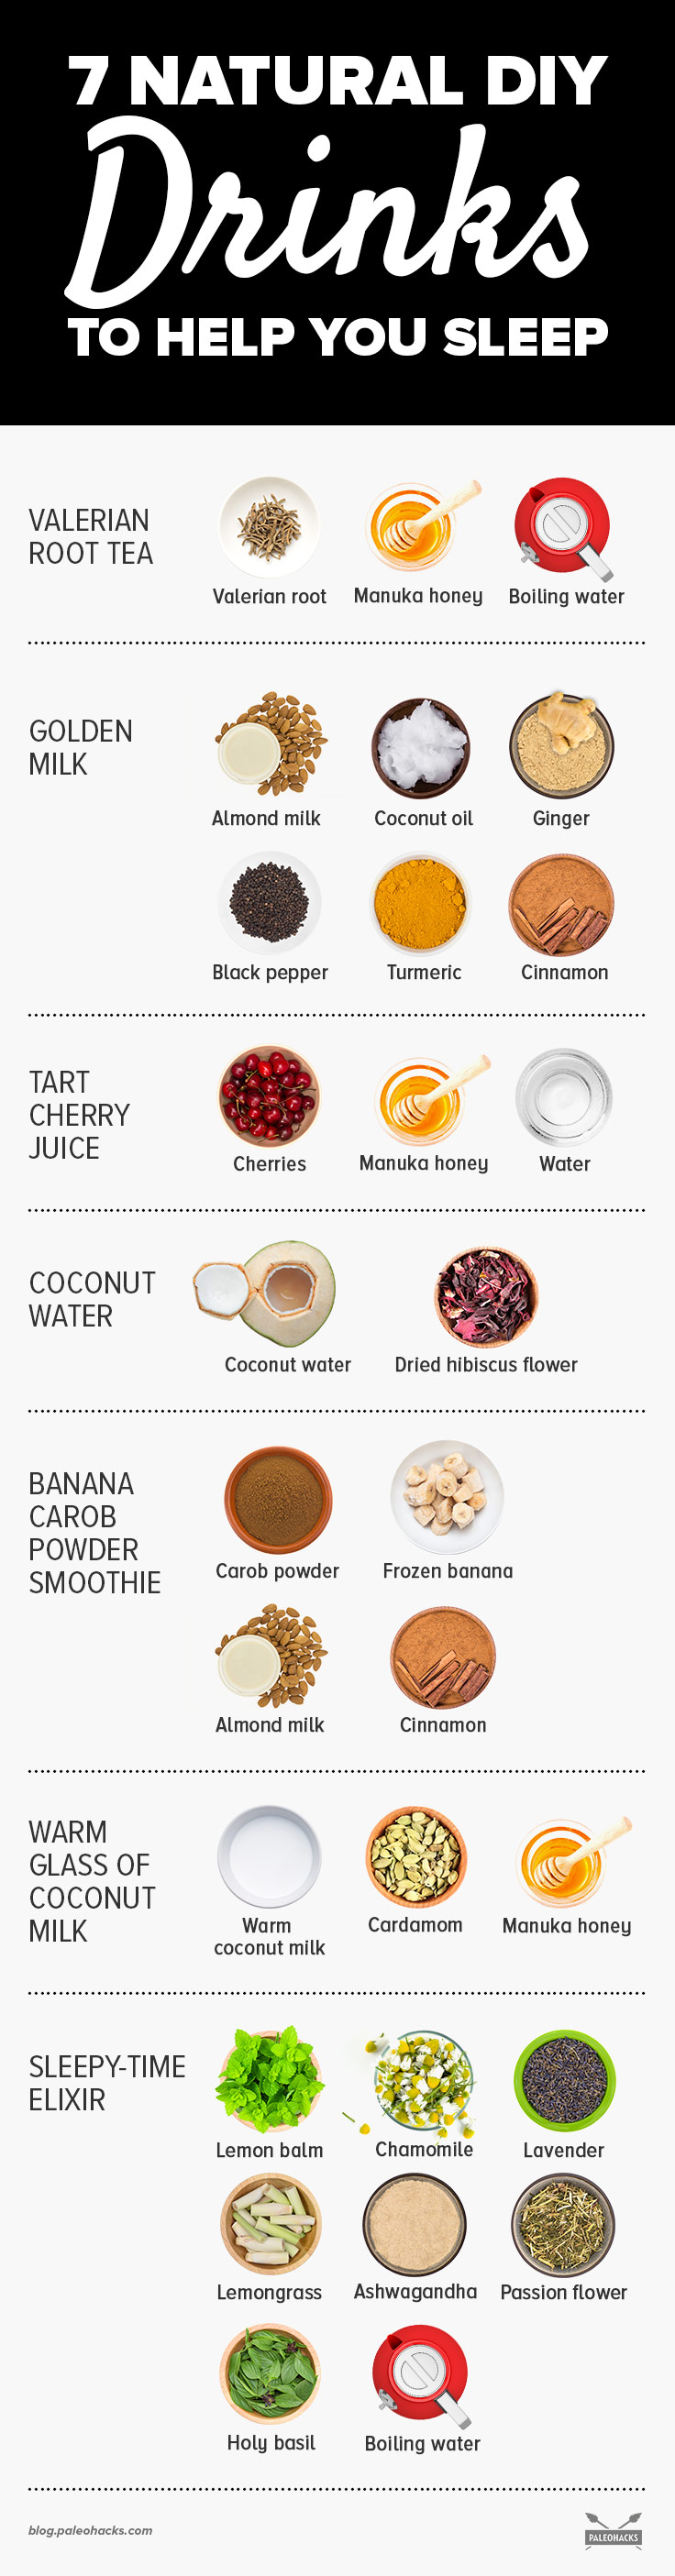 7 Natural Drinks You Can Make For Better Sleep Infographic